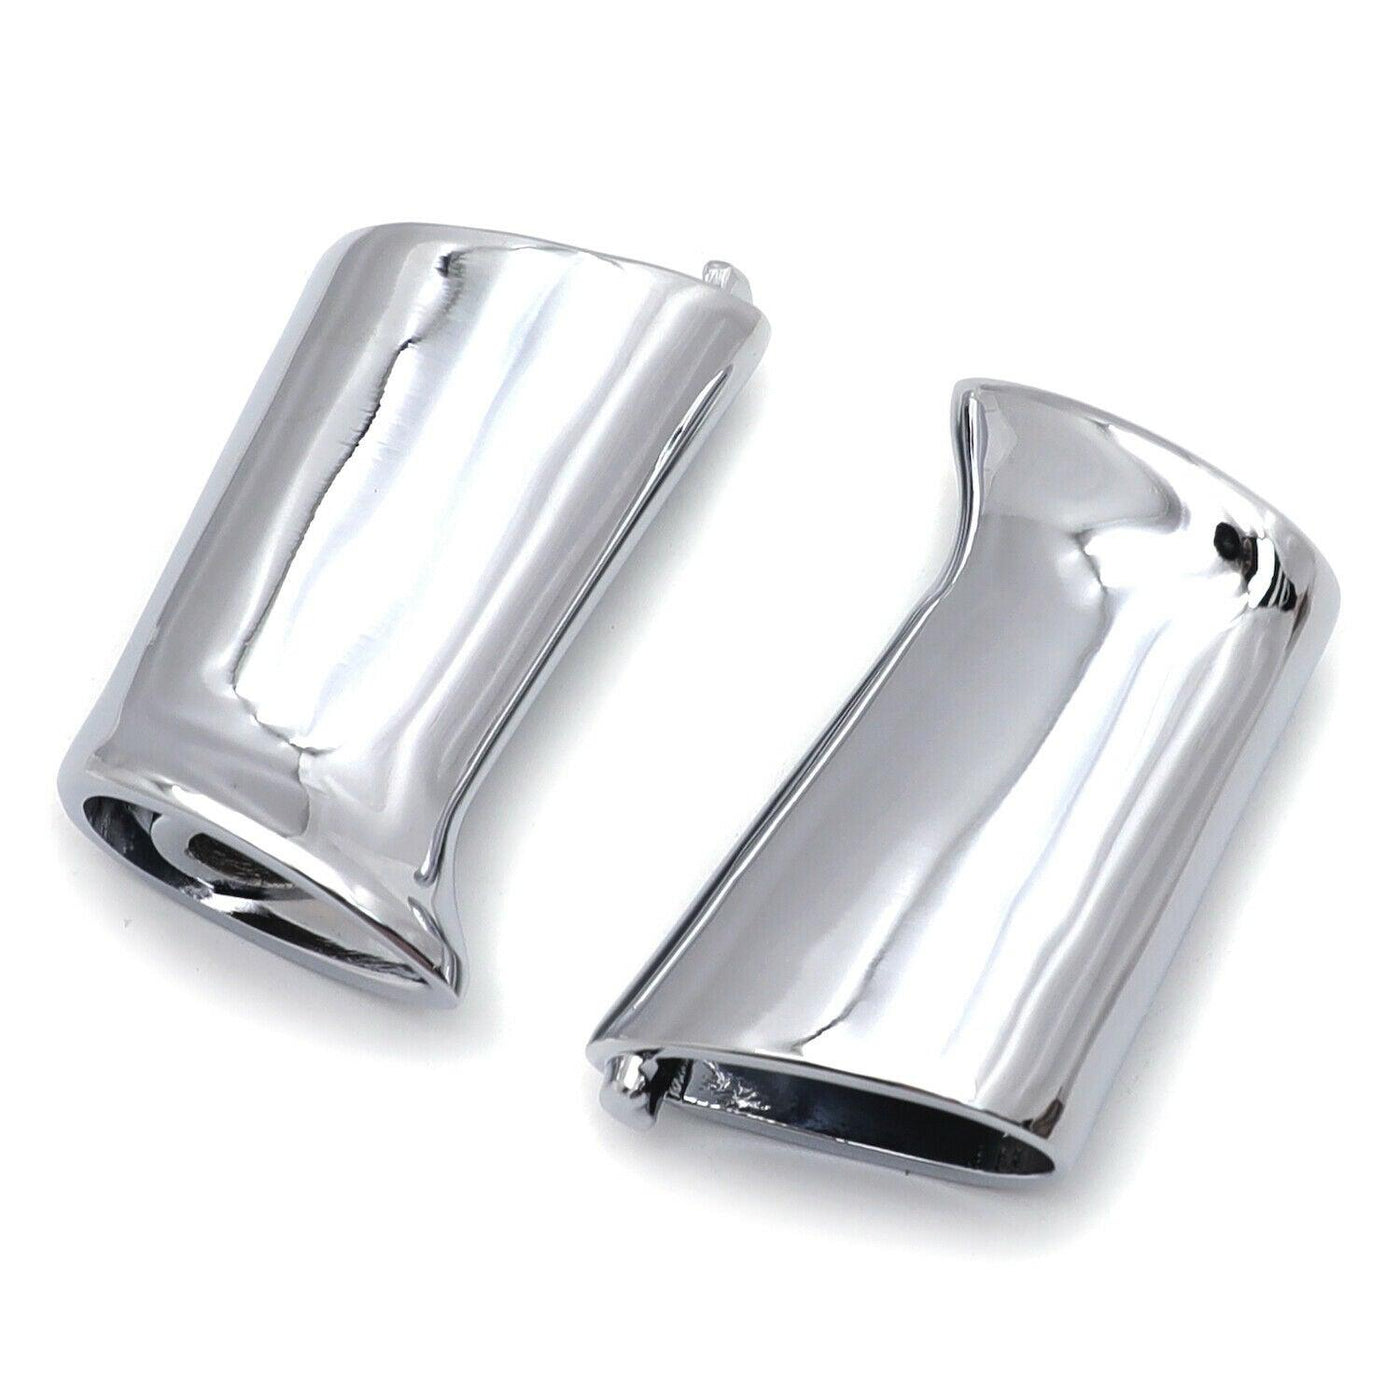 Mount Bracket Rear Turn Signal For 1992& up Harley Sportster XL883 XL1200 Chrome - Moto Life Products